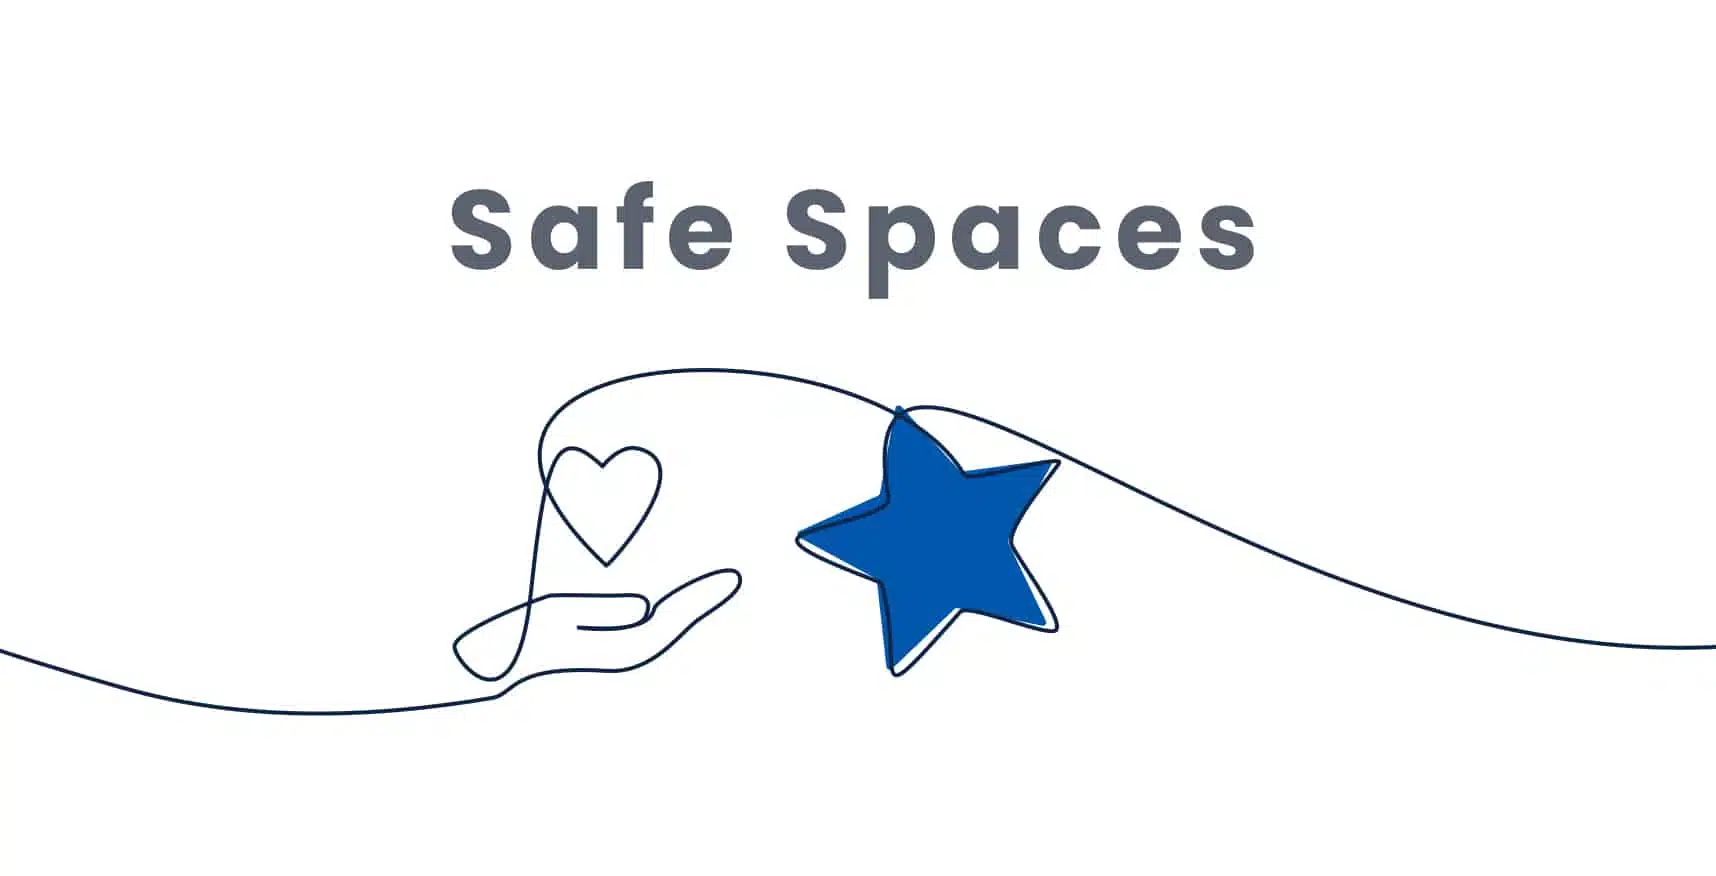 Line drawing of a hand holding a heart with a blue star floating above, next to the words "Safe Spaces".